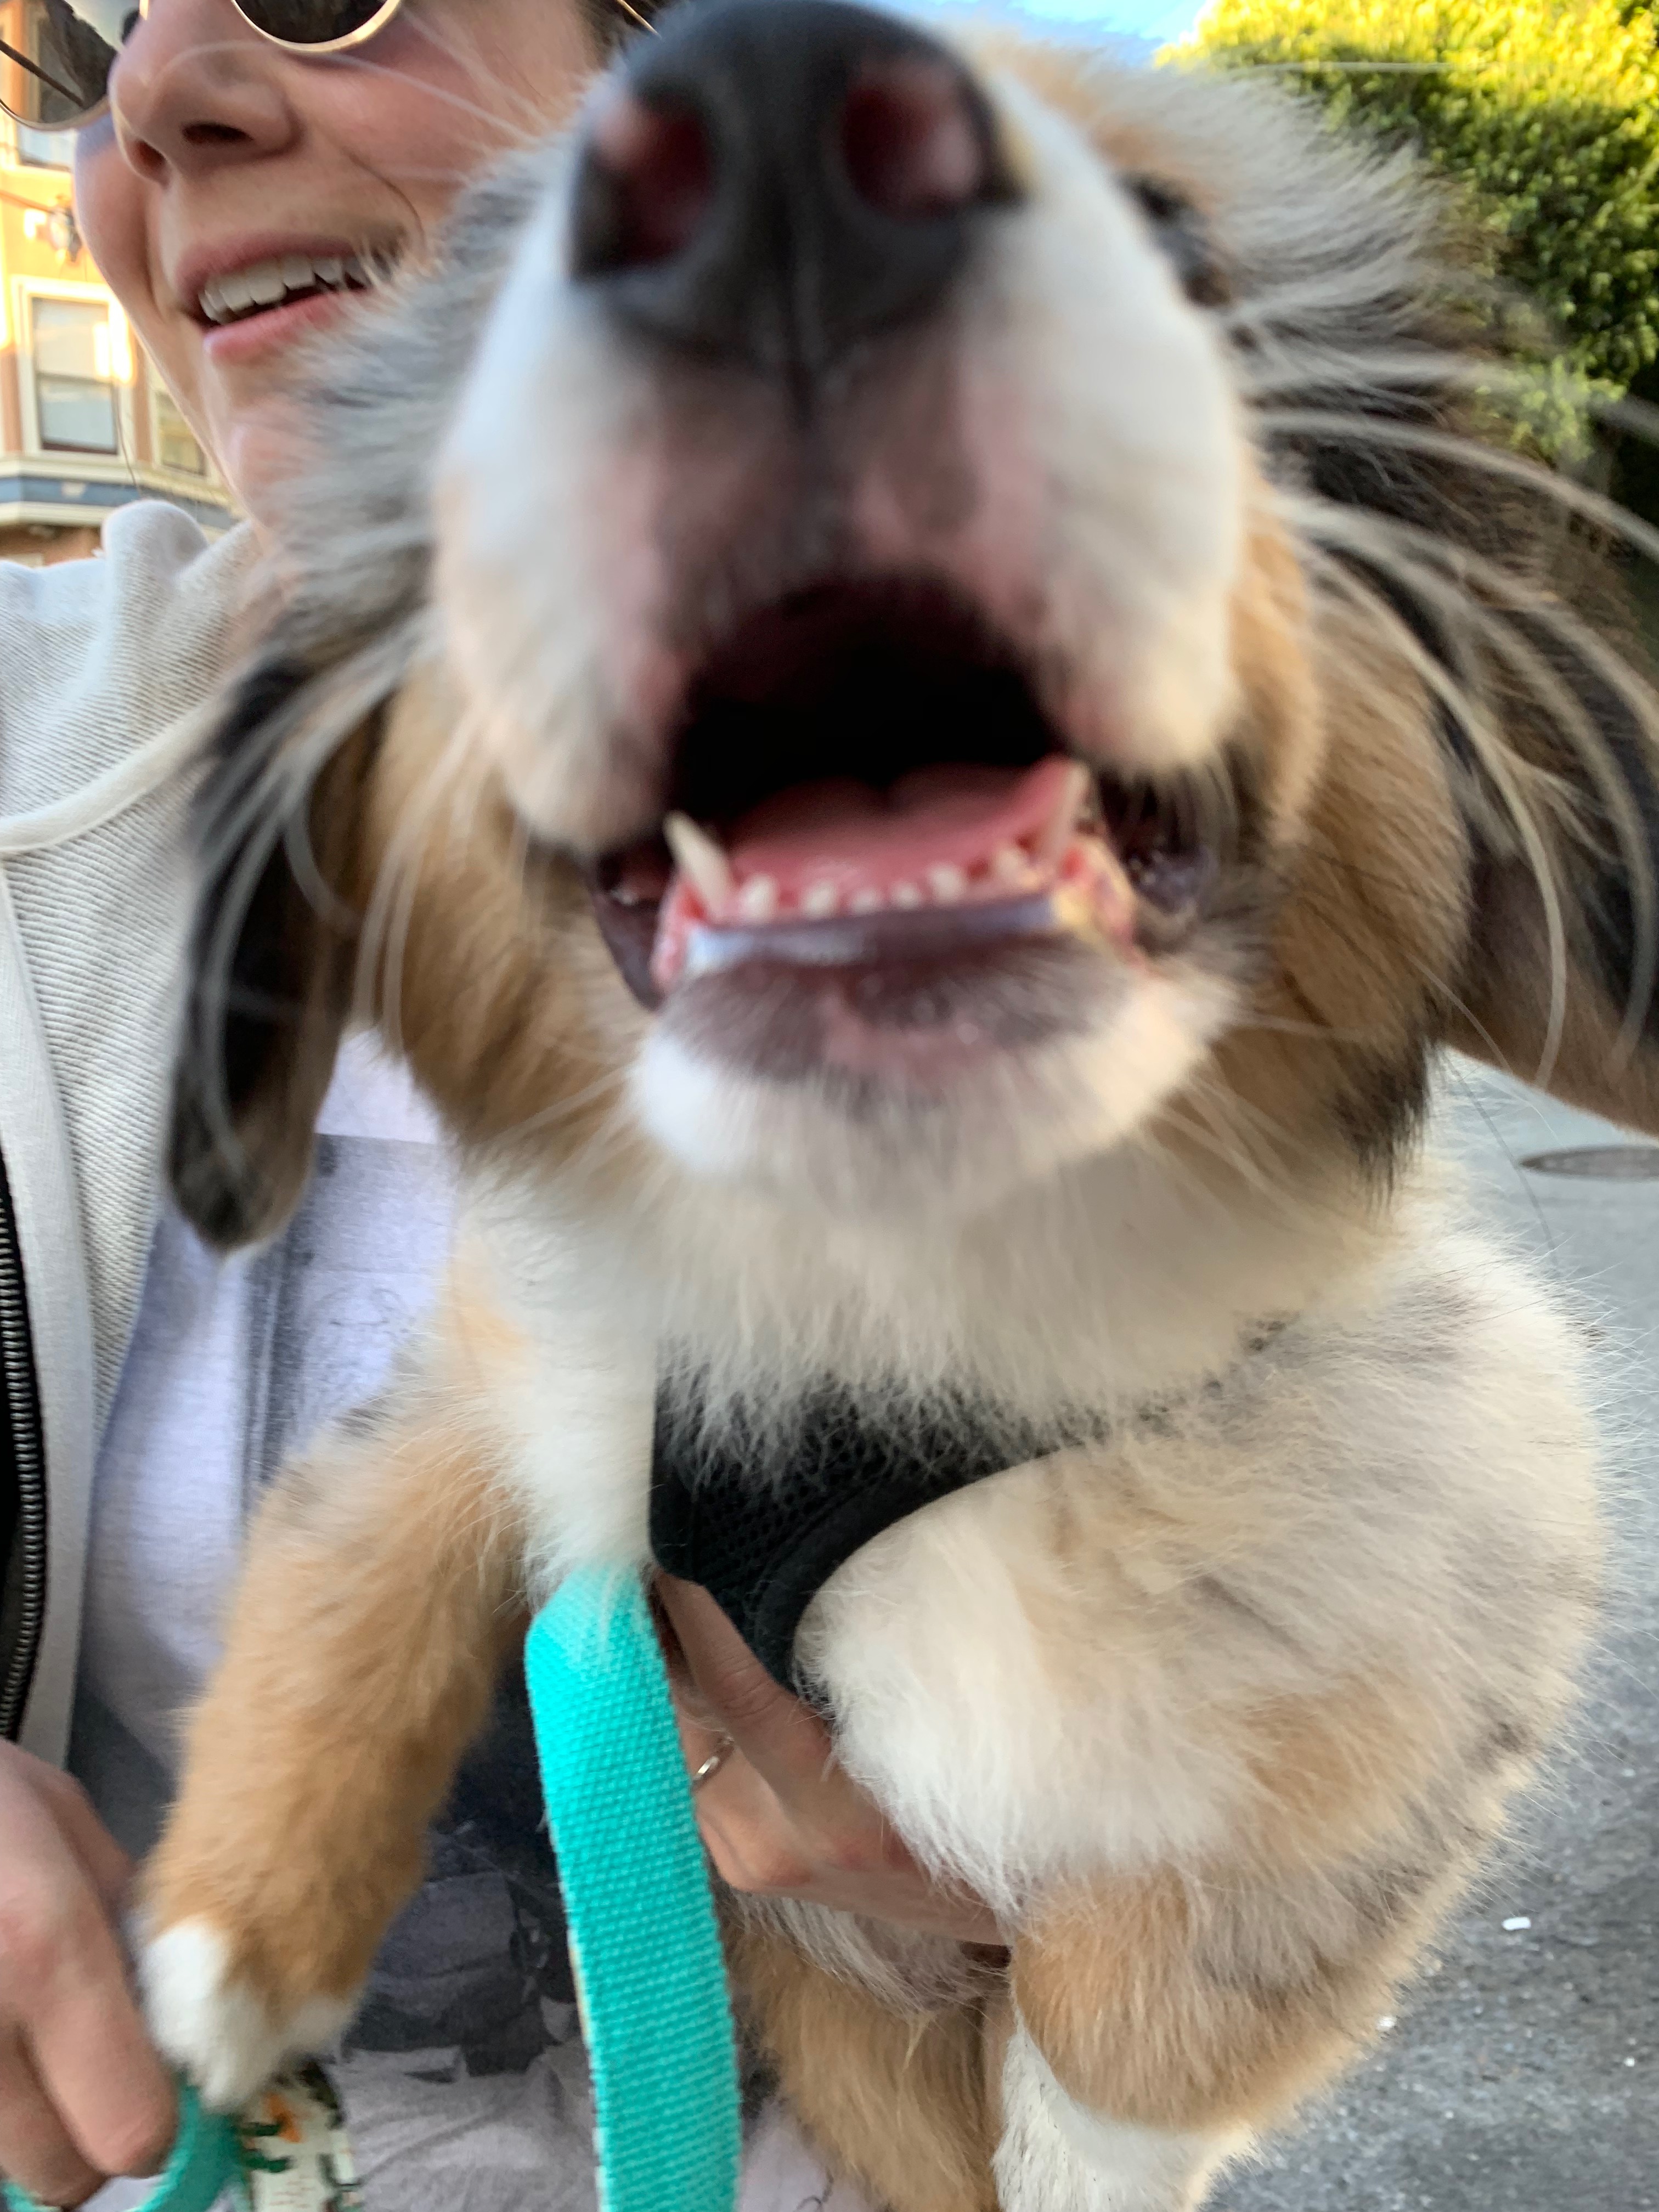 Adorable Fluffy Australian Shepherd Puppy Sticking His Nose Up To The Camera